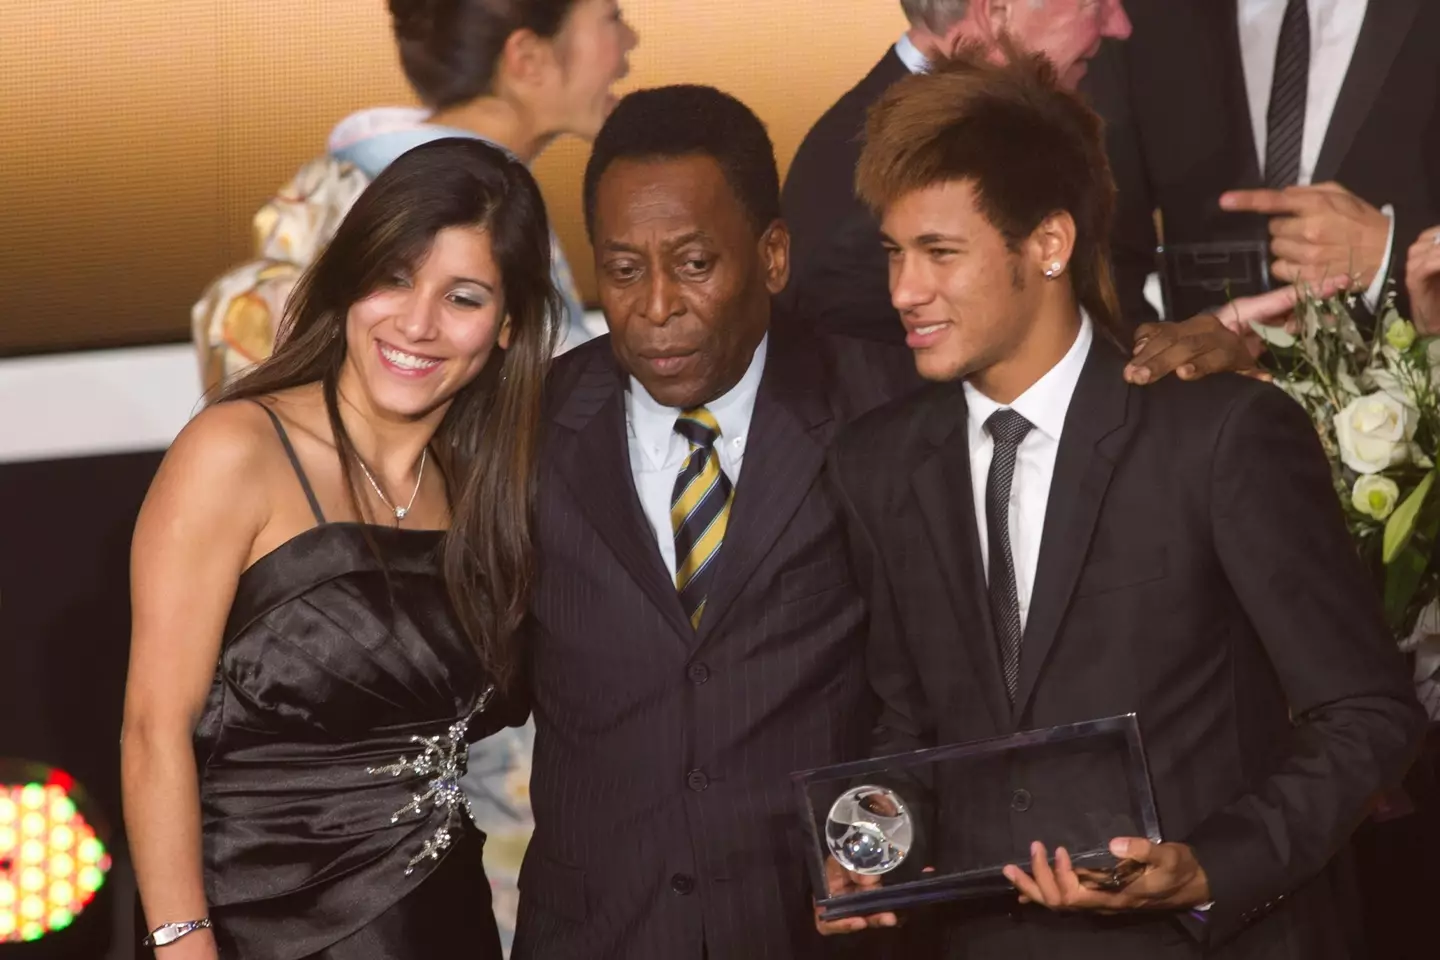 Neymar and Pele together in 2012. (Image